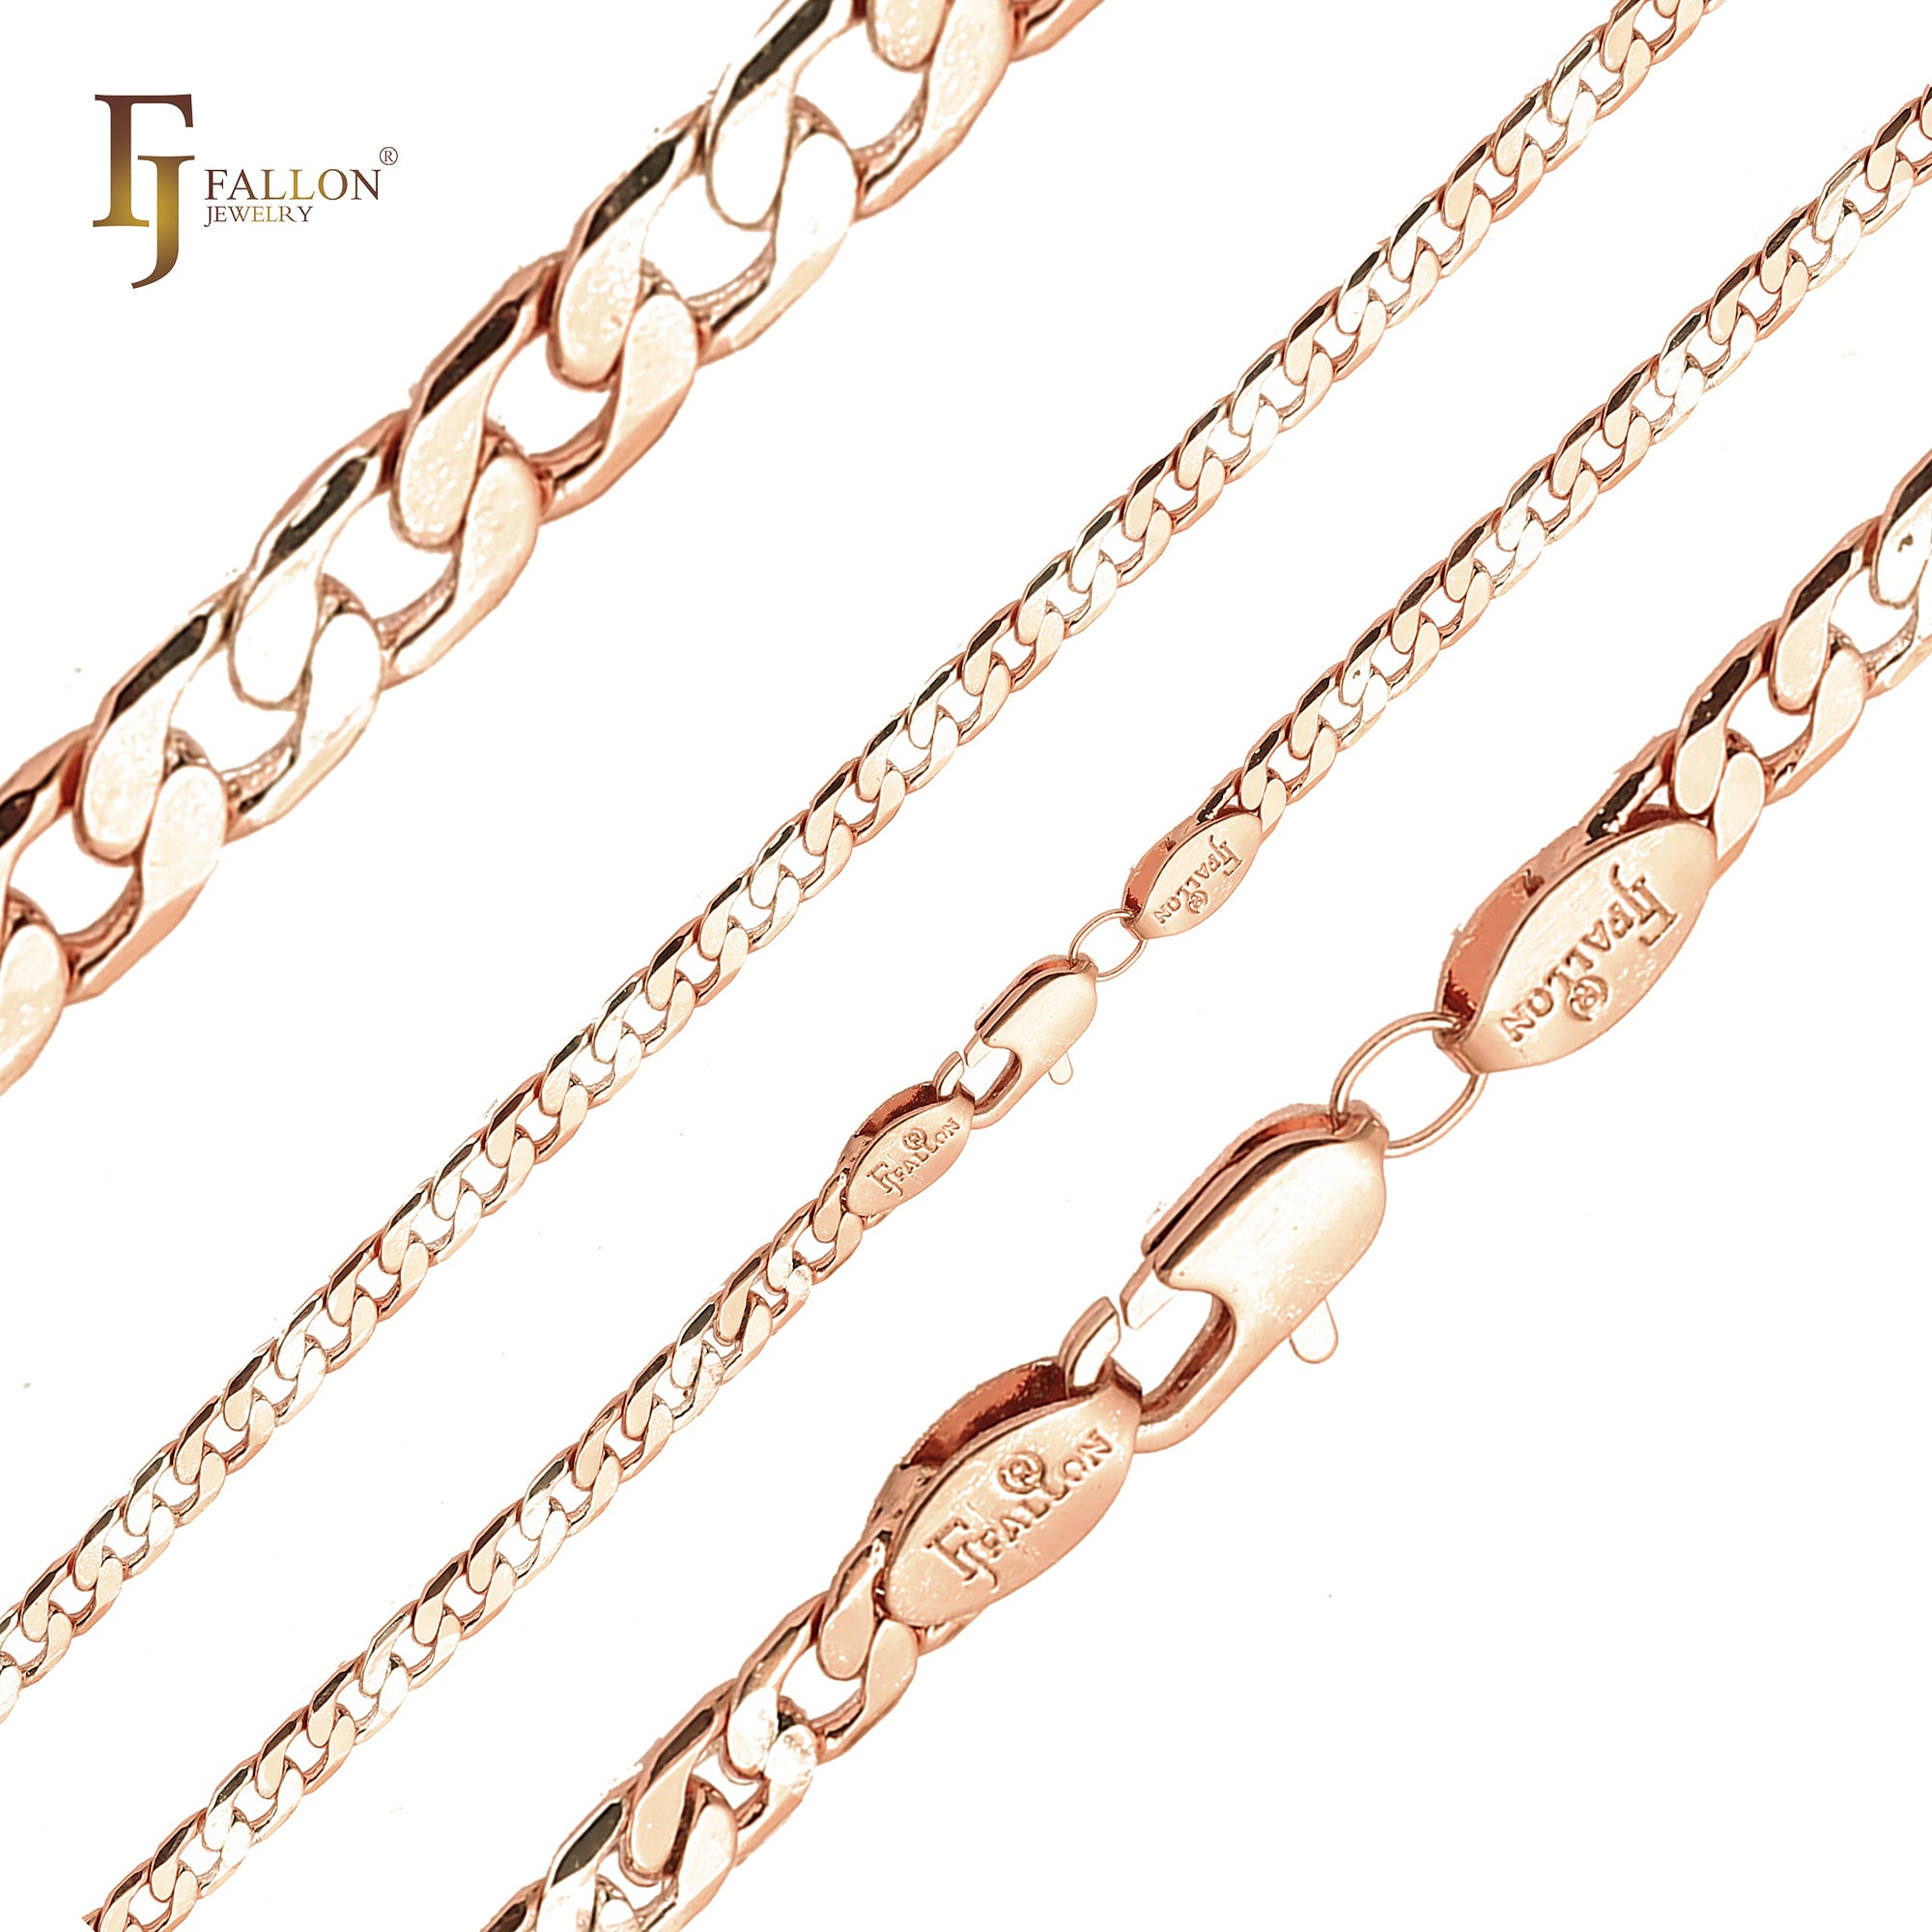 Classic Curb link chains plated in Rose Gold, two tone